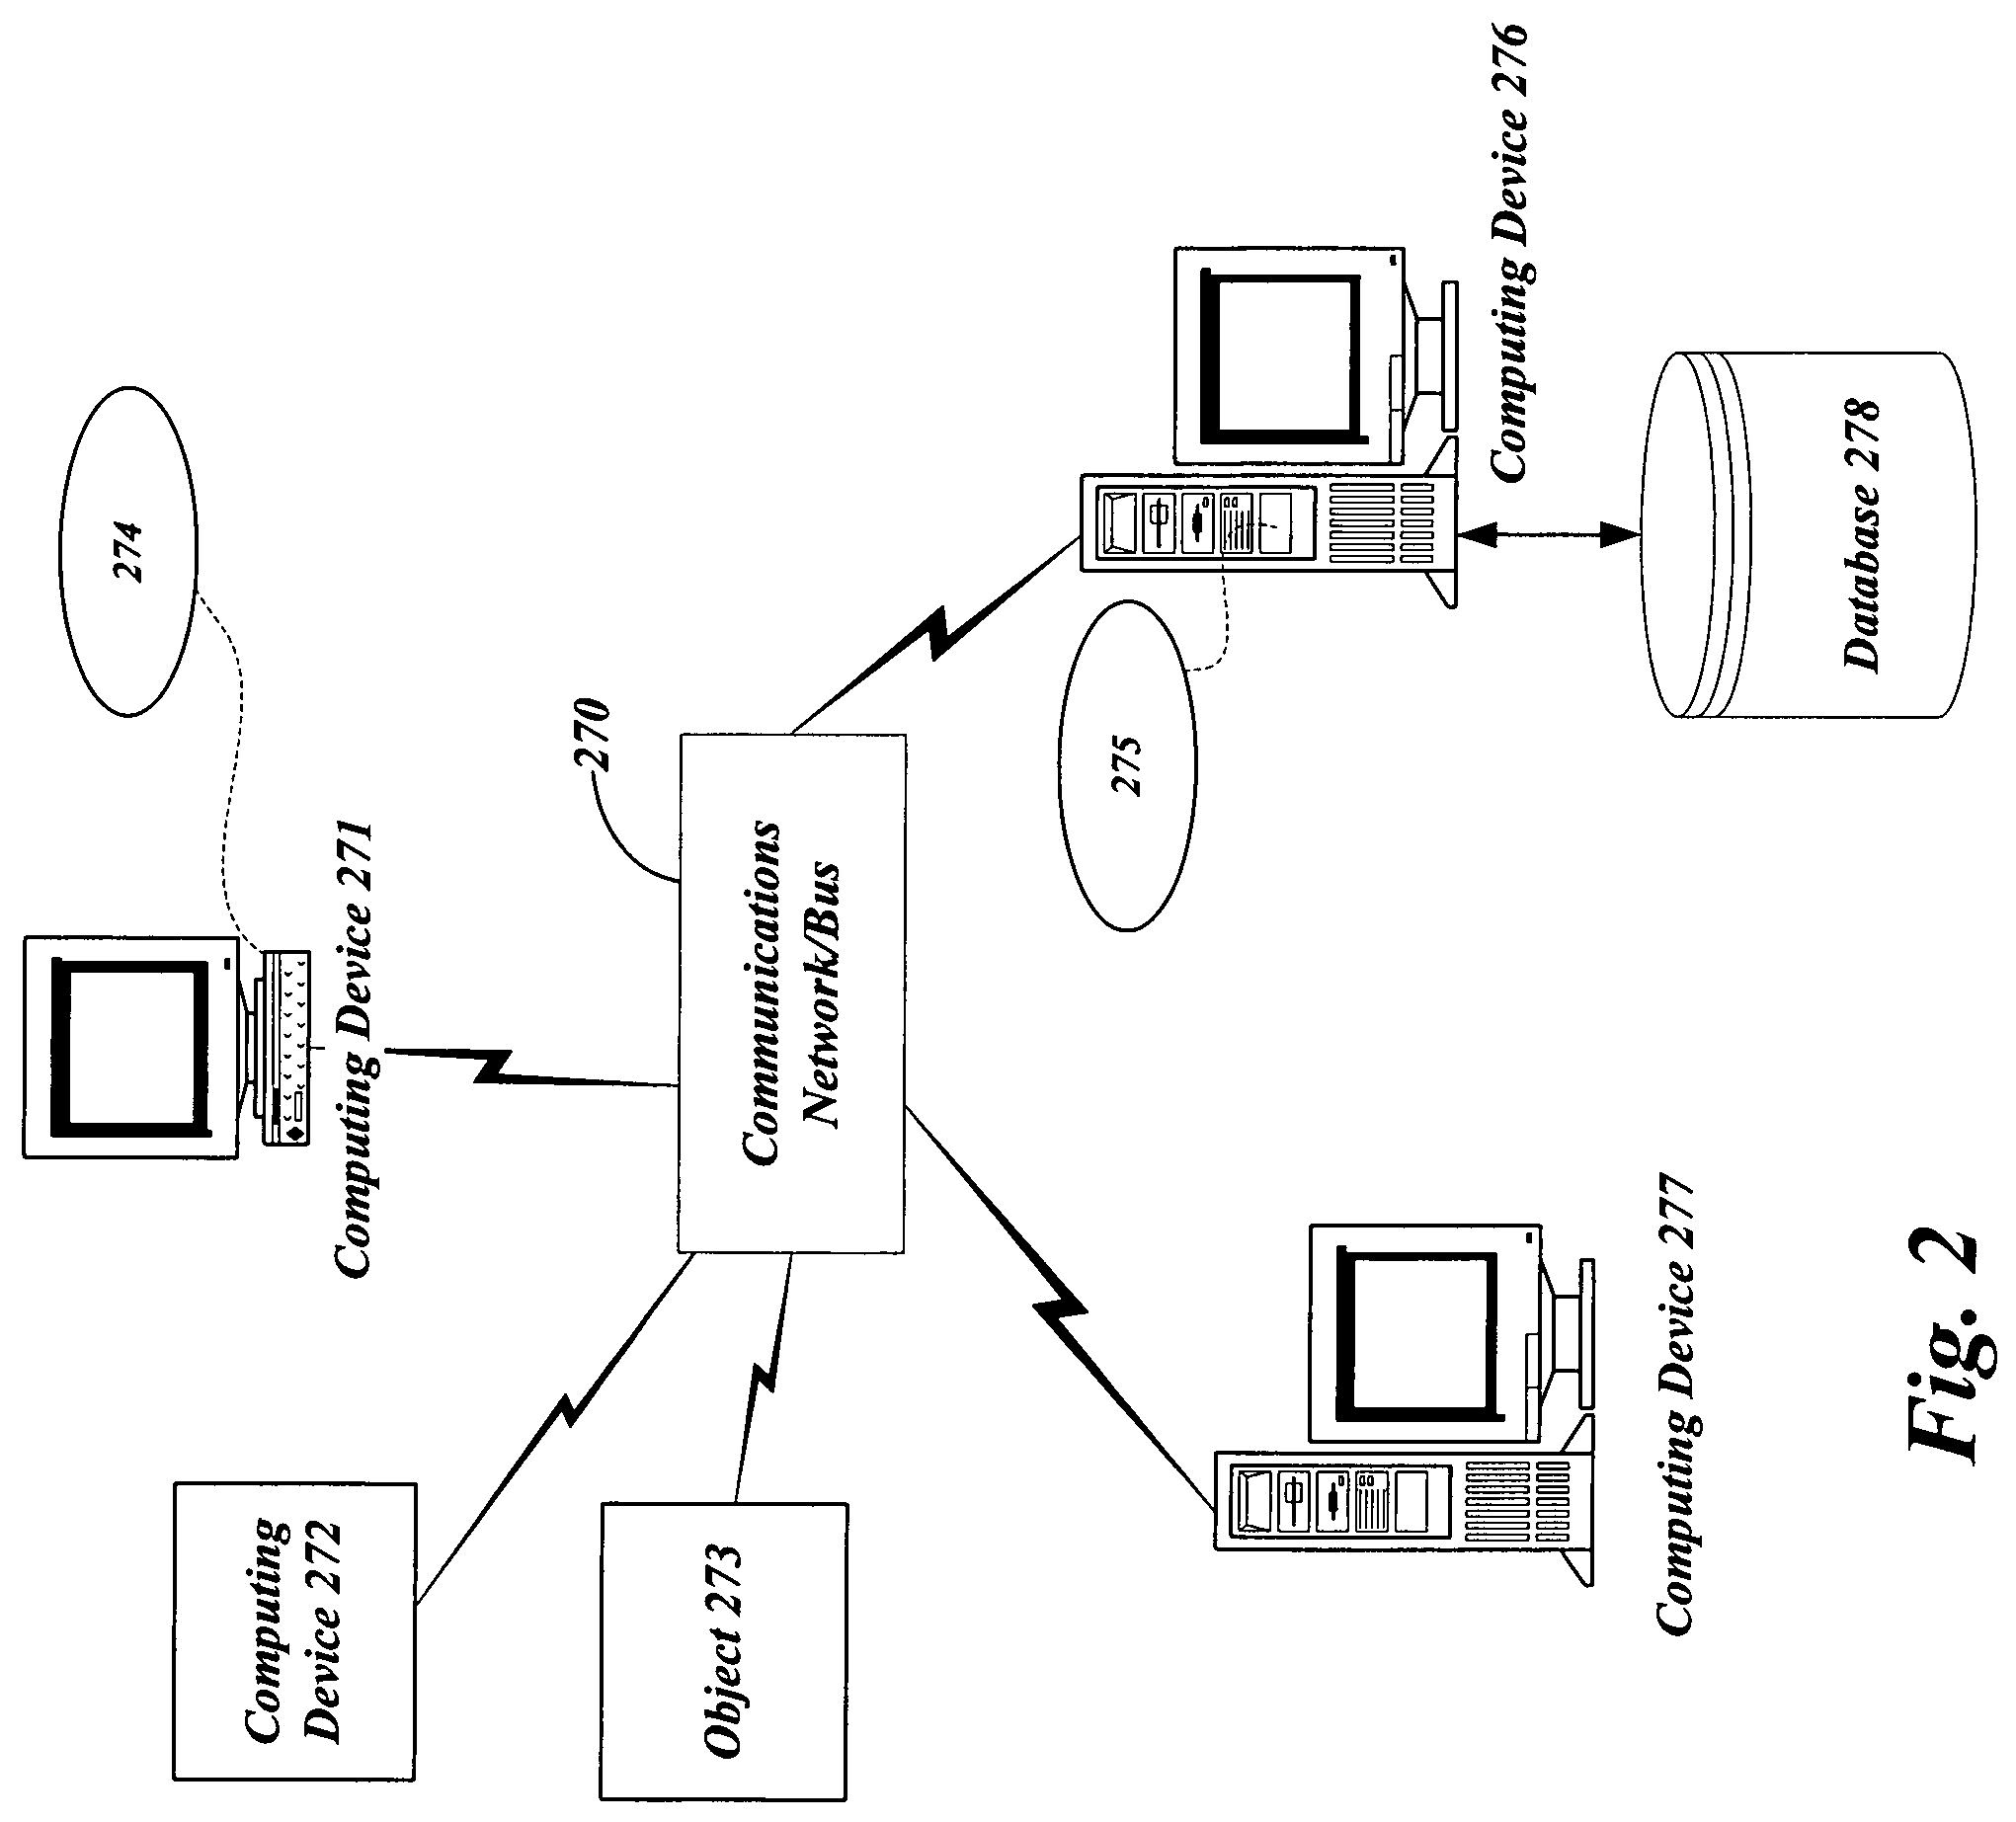 Systems and methods for securely booting a computer with a trusted processing module